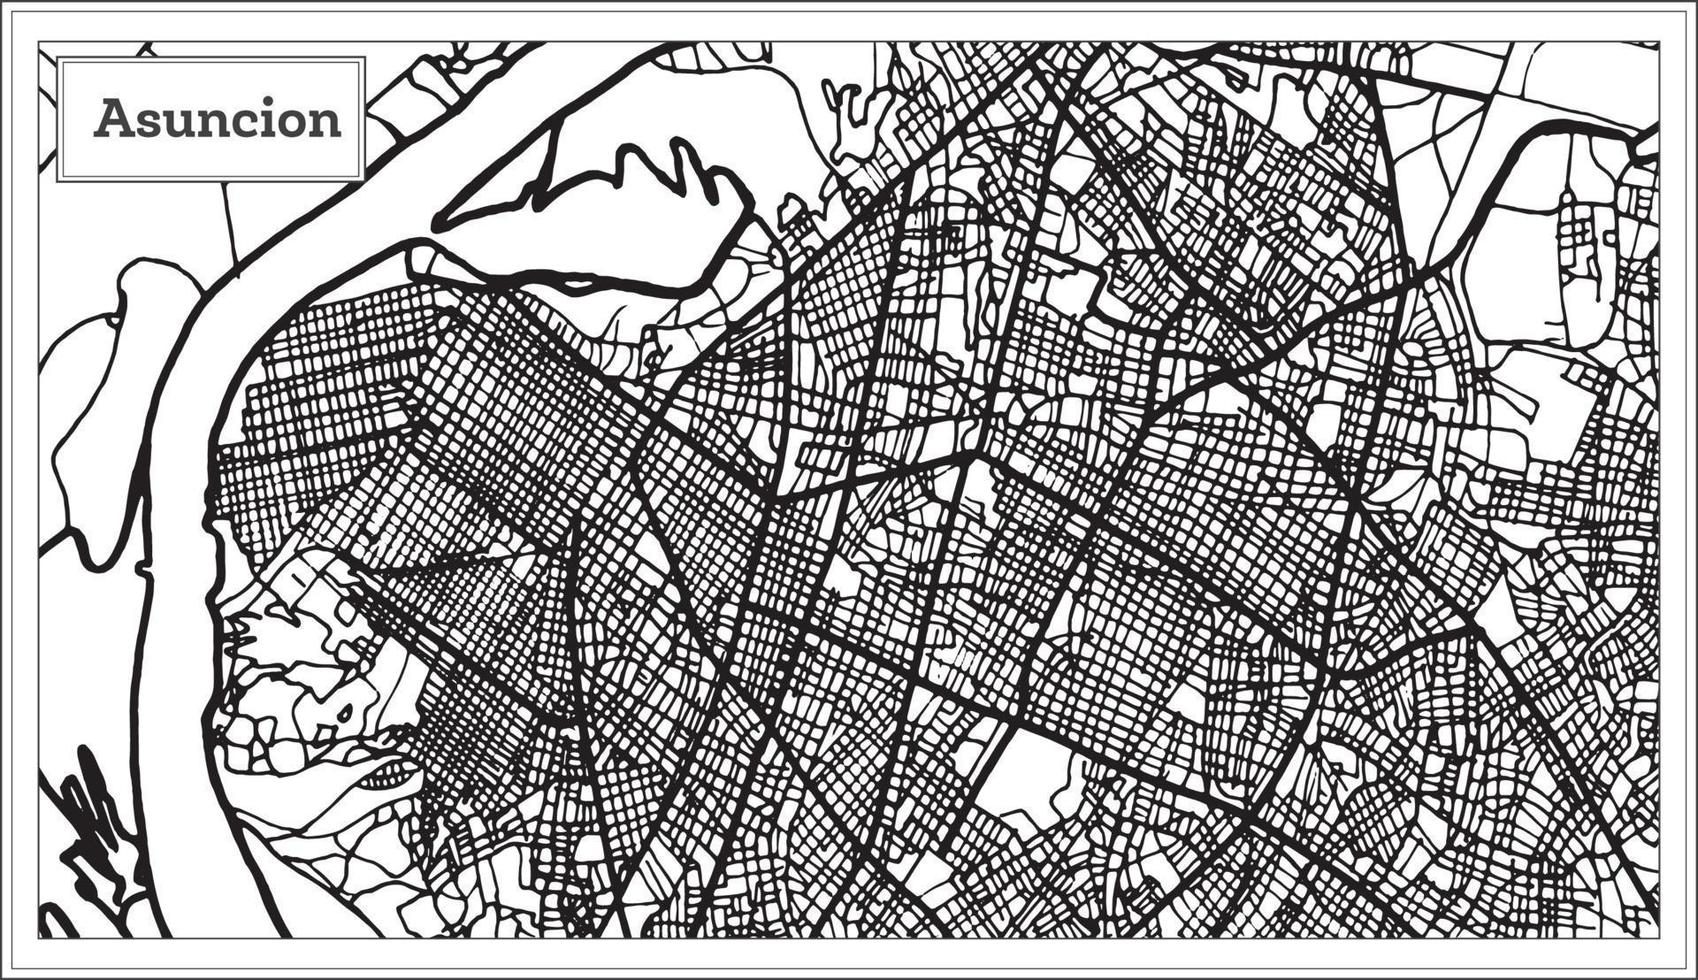 Asuncion Paraguay City Map in Black and White Color. vector